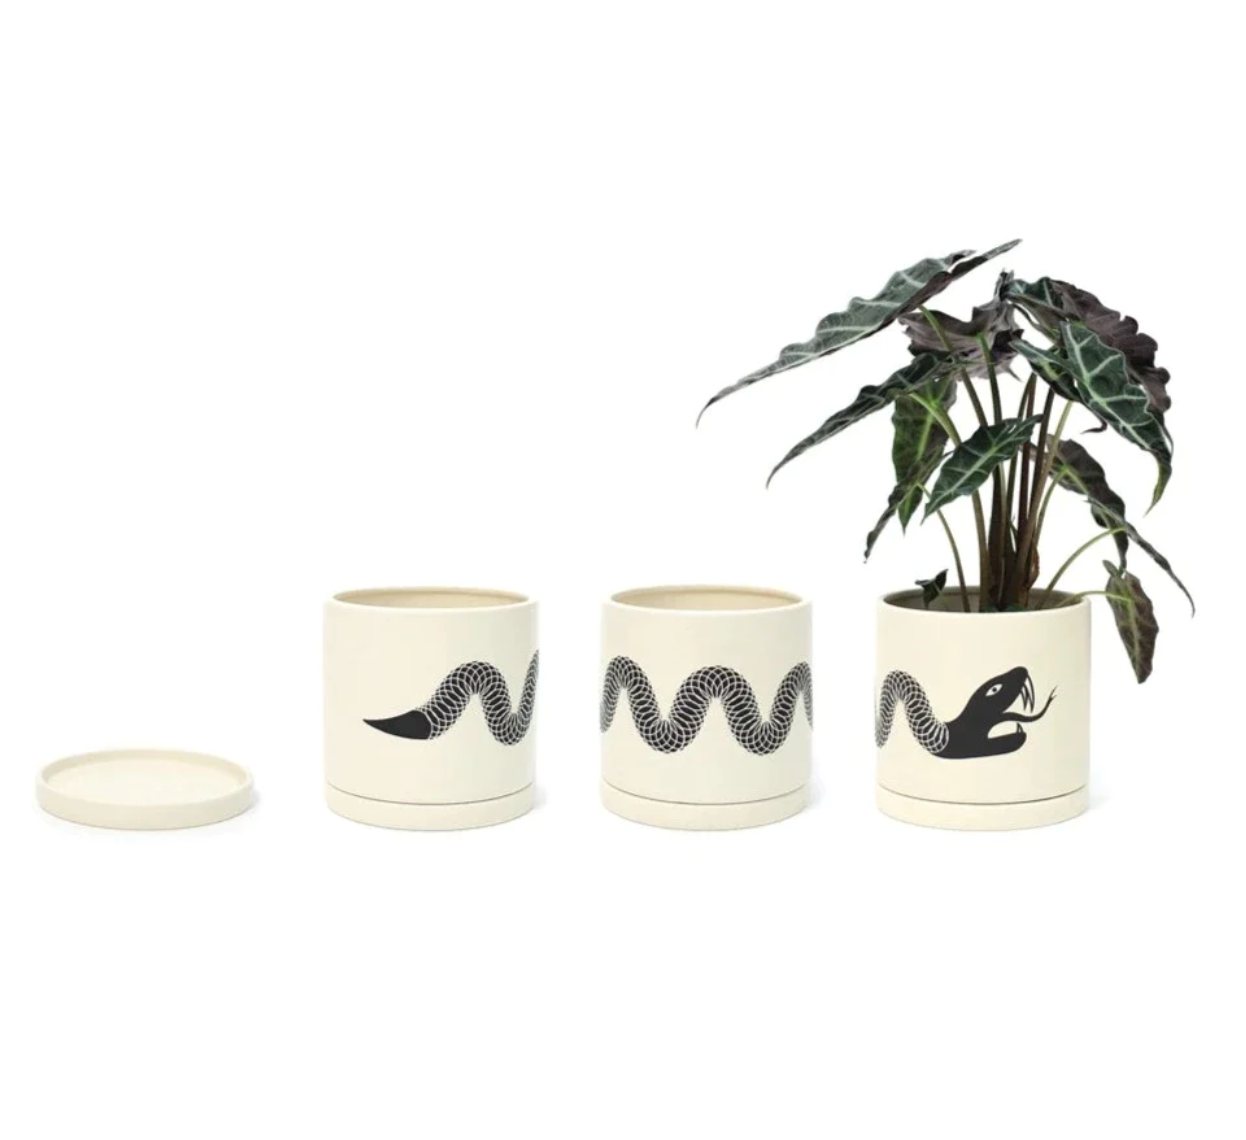 Ouroboros Snake Planters by Soul of the Party